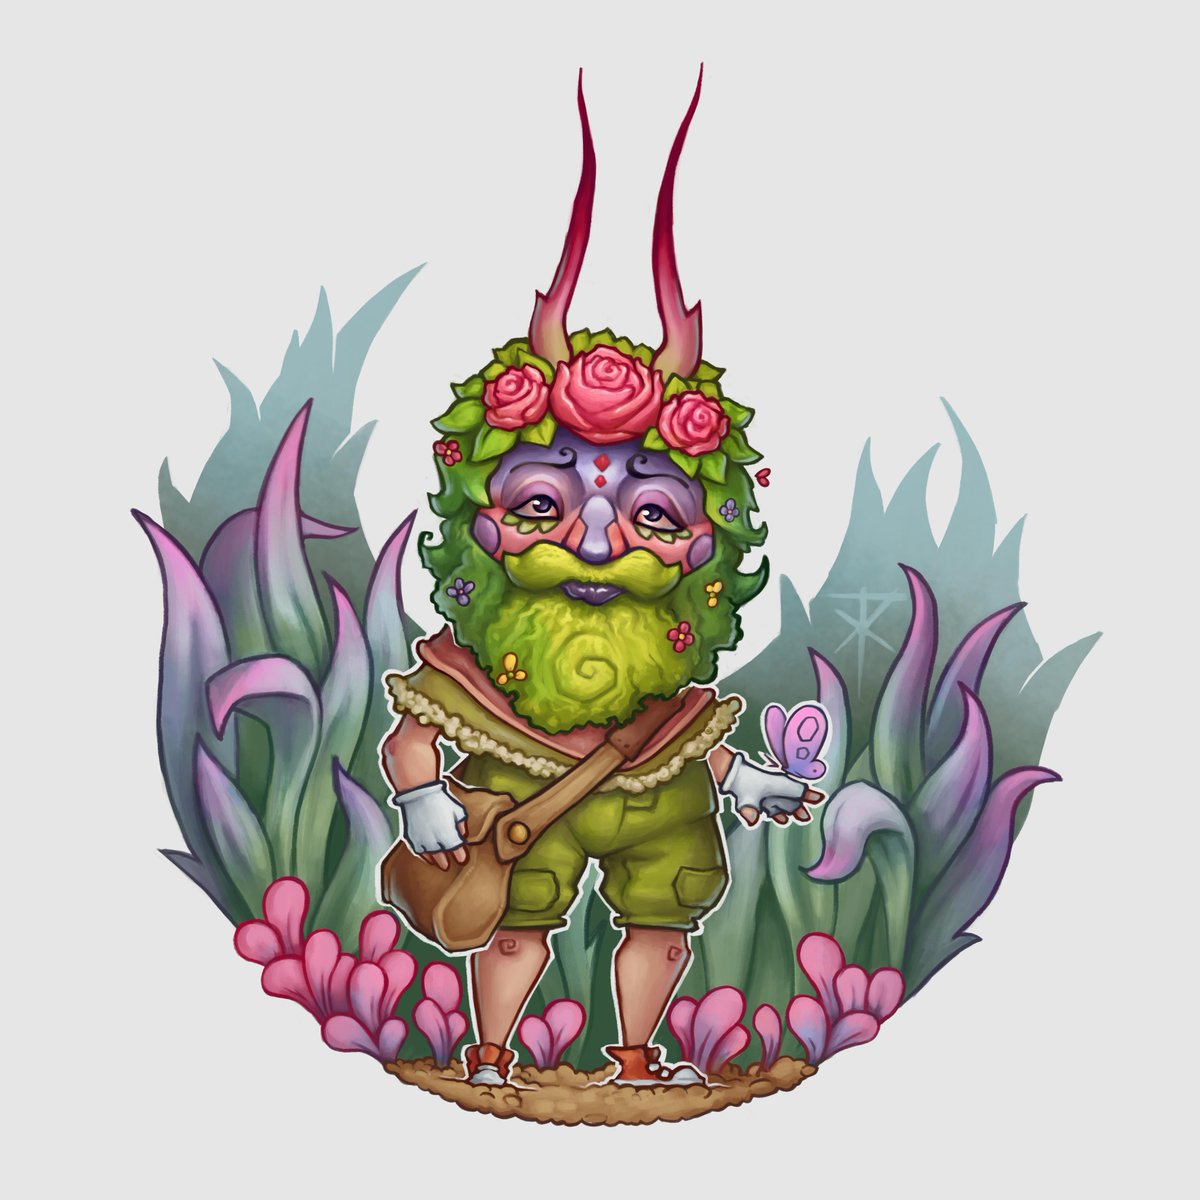 Hey,My name is Leonard and I'm a fantasy artist from Austria.I love the cute, the weird and all things magical.If you enjoy my art, please feel free to support me on Ko-fi: https://ko-fi.com/tofurevolution 